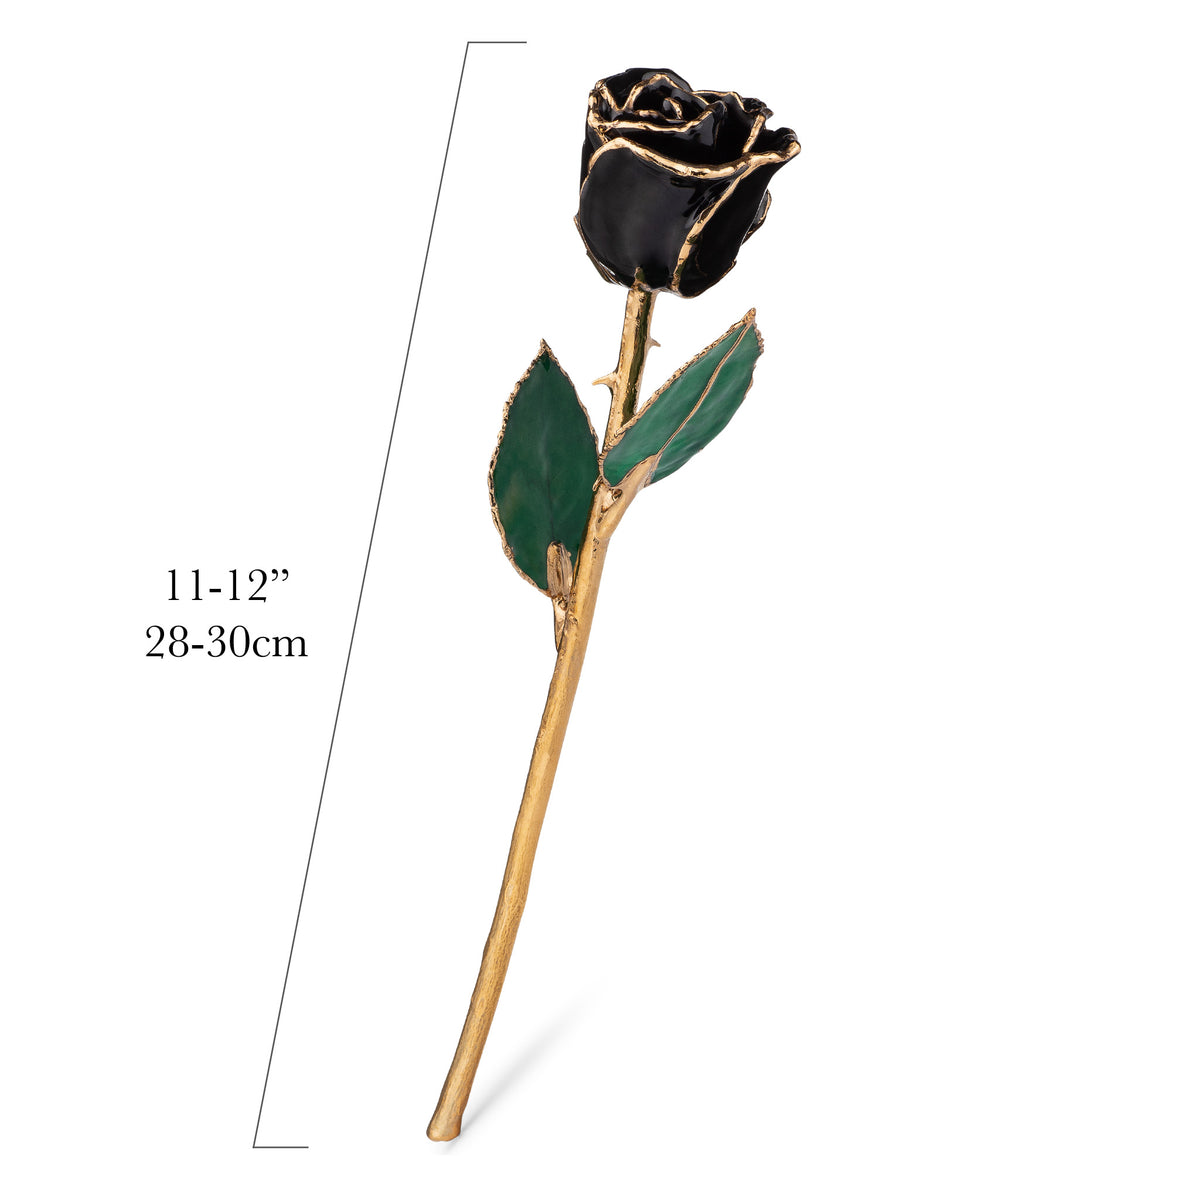 24K Gold Trimmed Forever Rose in Black Color with View of Stem, Leaves, and Rose Petals and Showing Detail of Gold Trim showing measurements